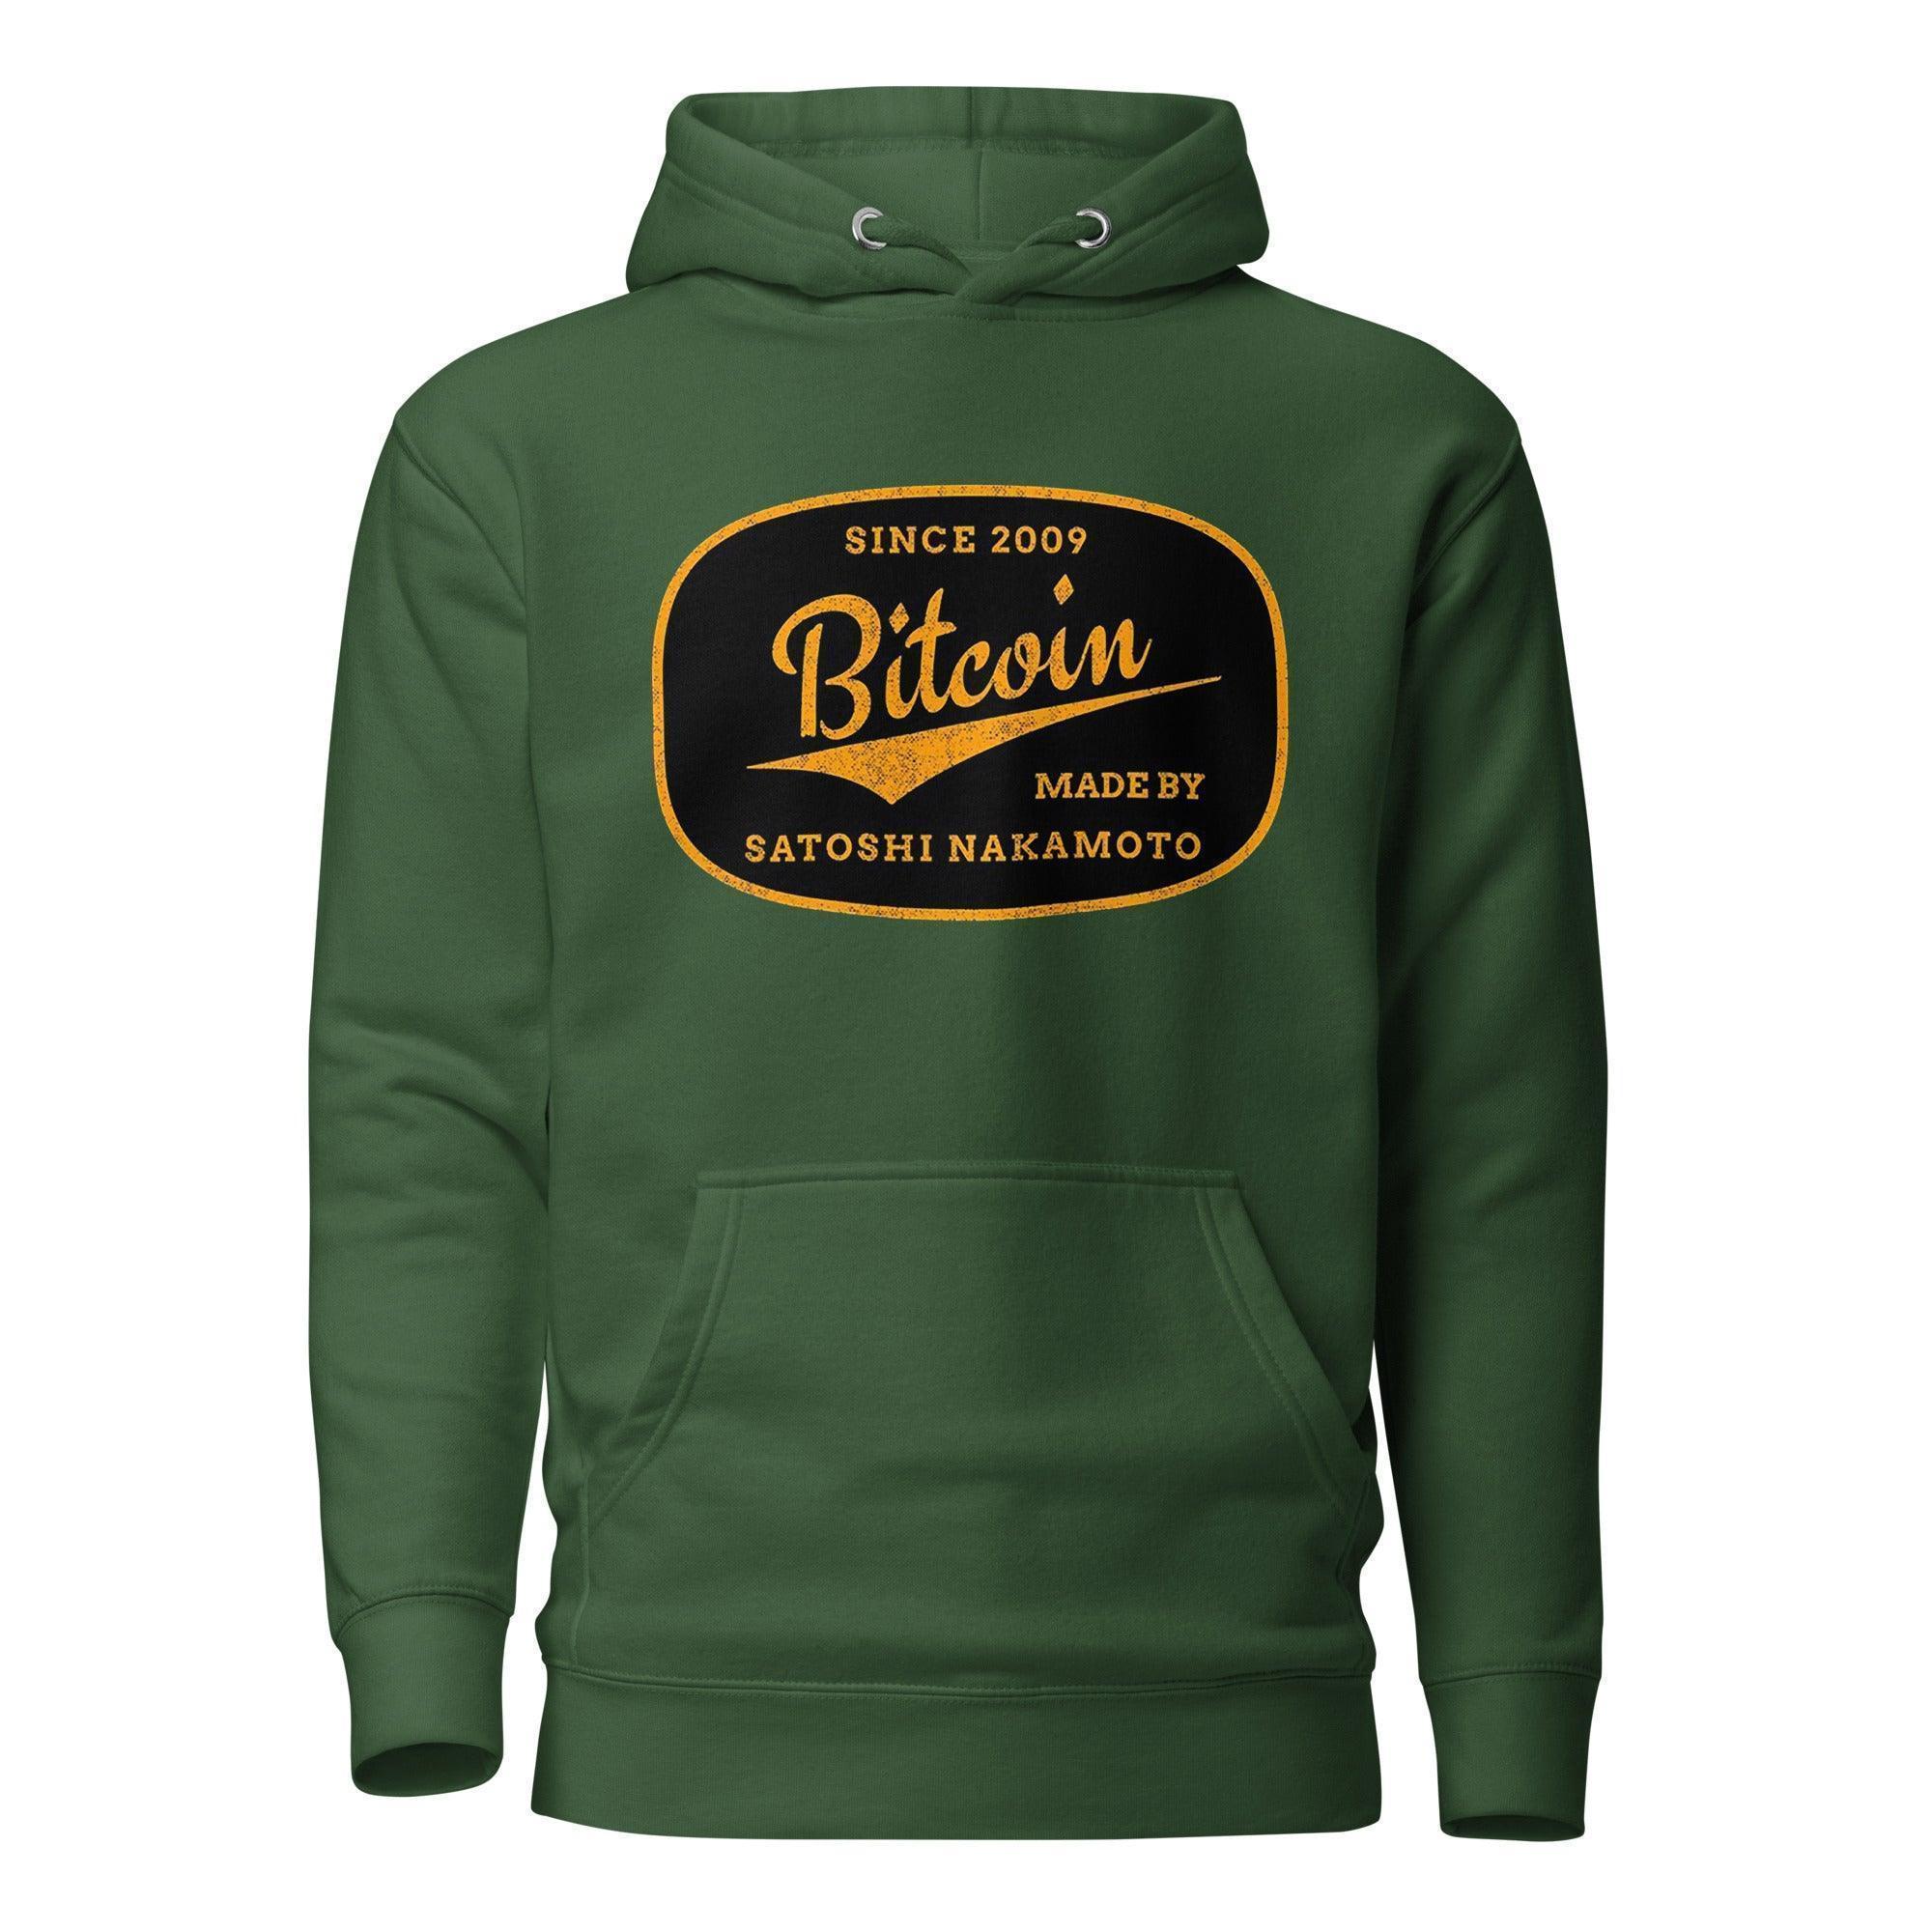 Bitcoin Since 2009 Pullover Hoodie